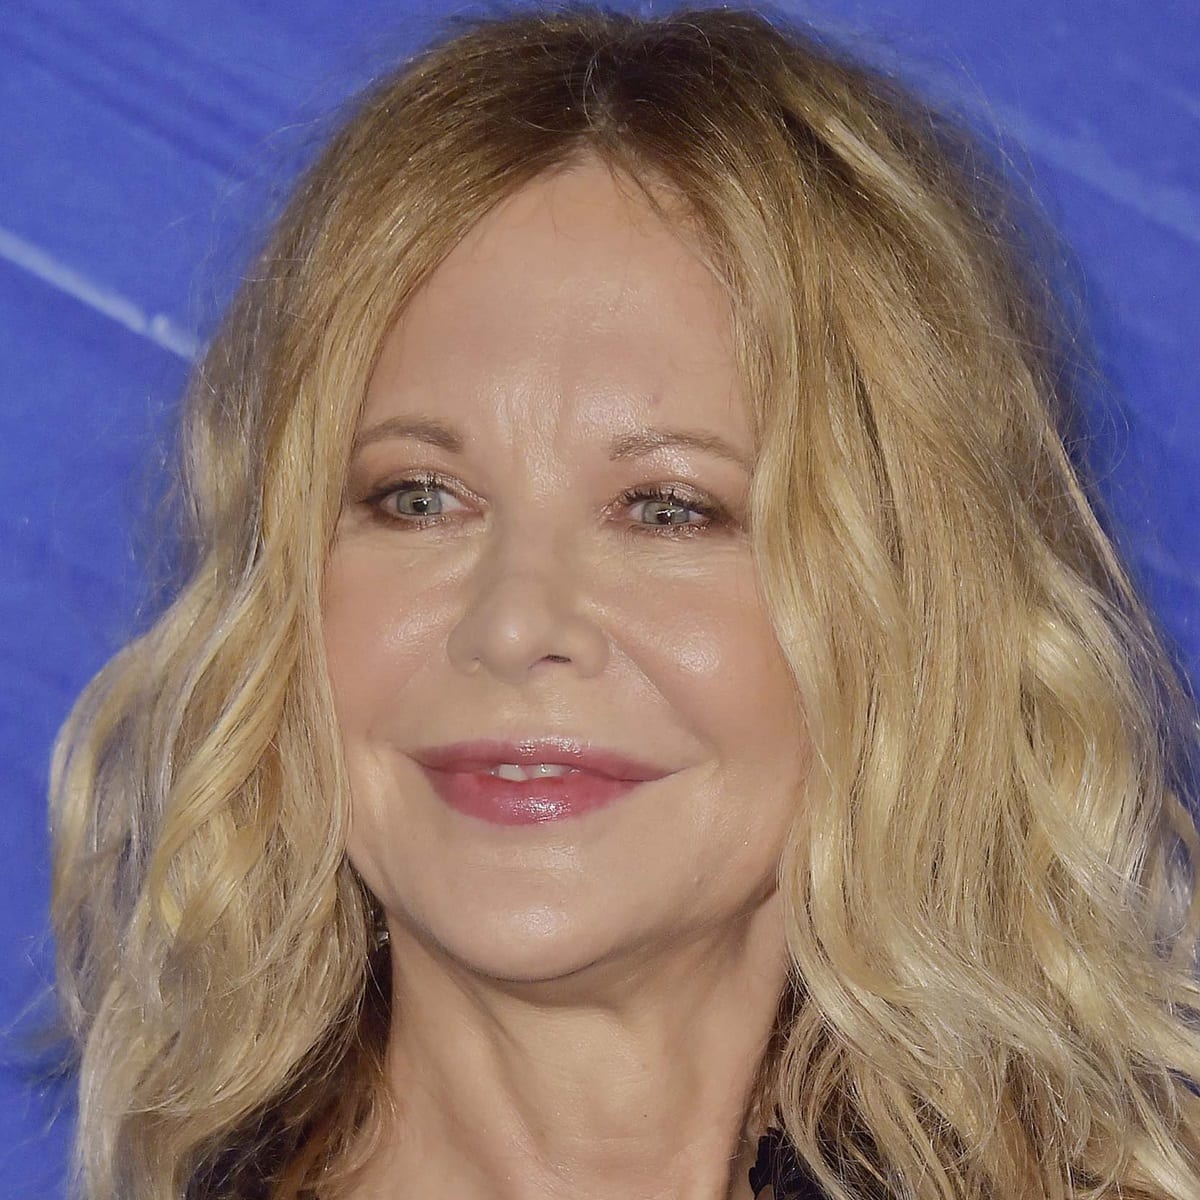 Meg Ryan has never publicly admitted to having plastic surgery, but there has been much speculation about her appearance over the years